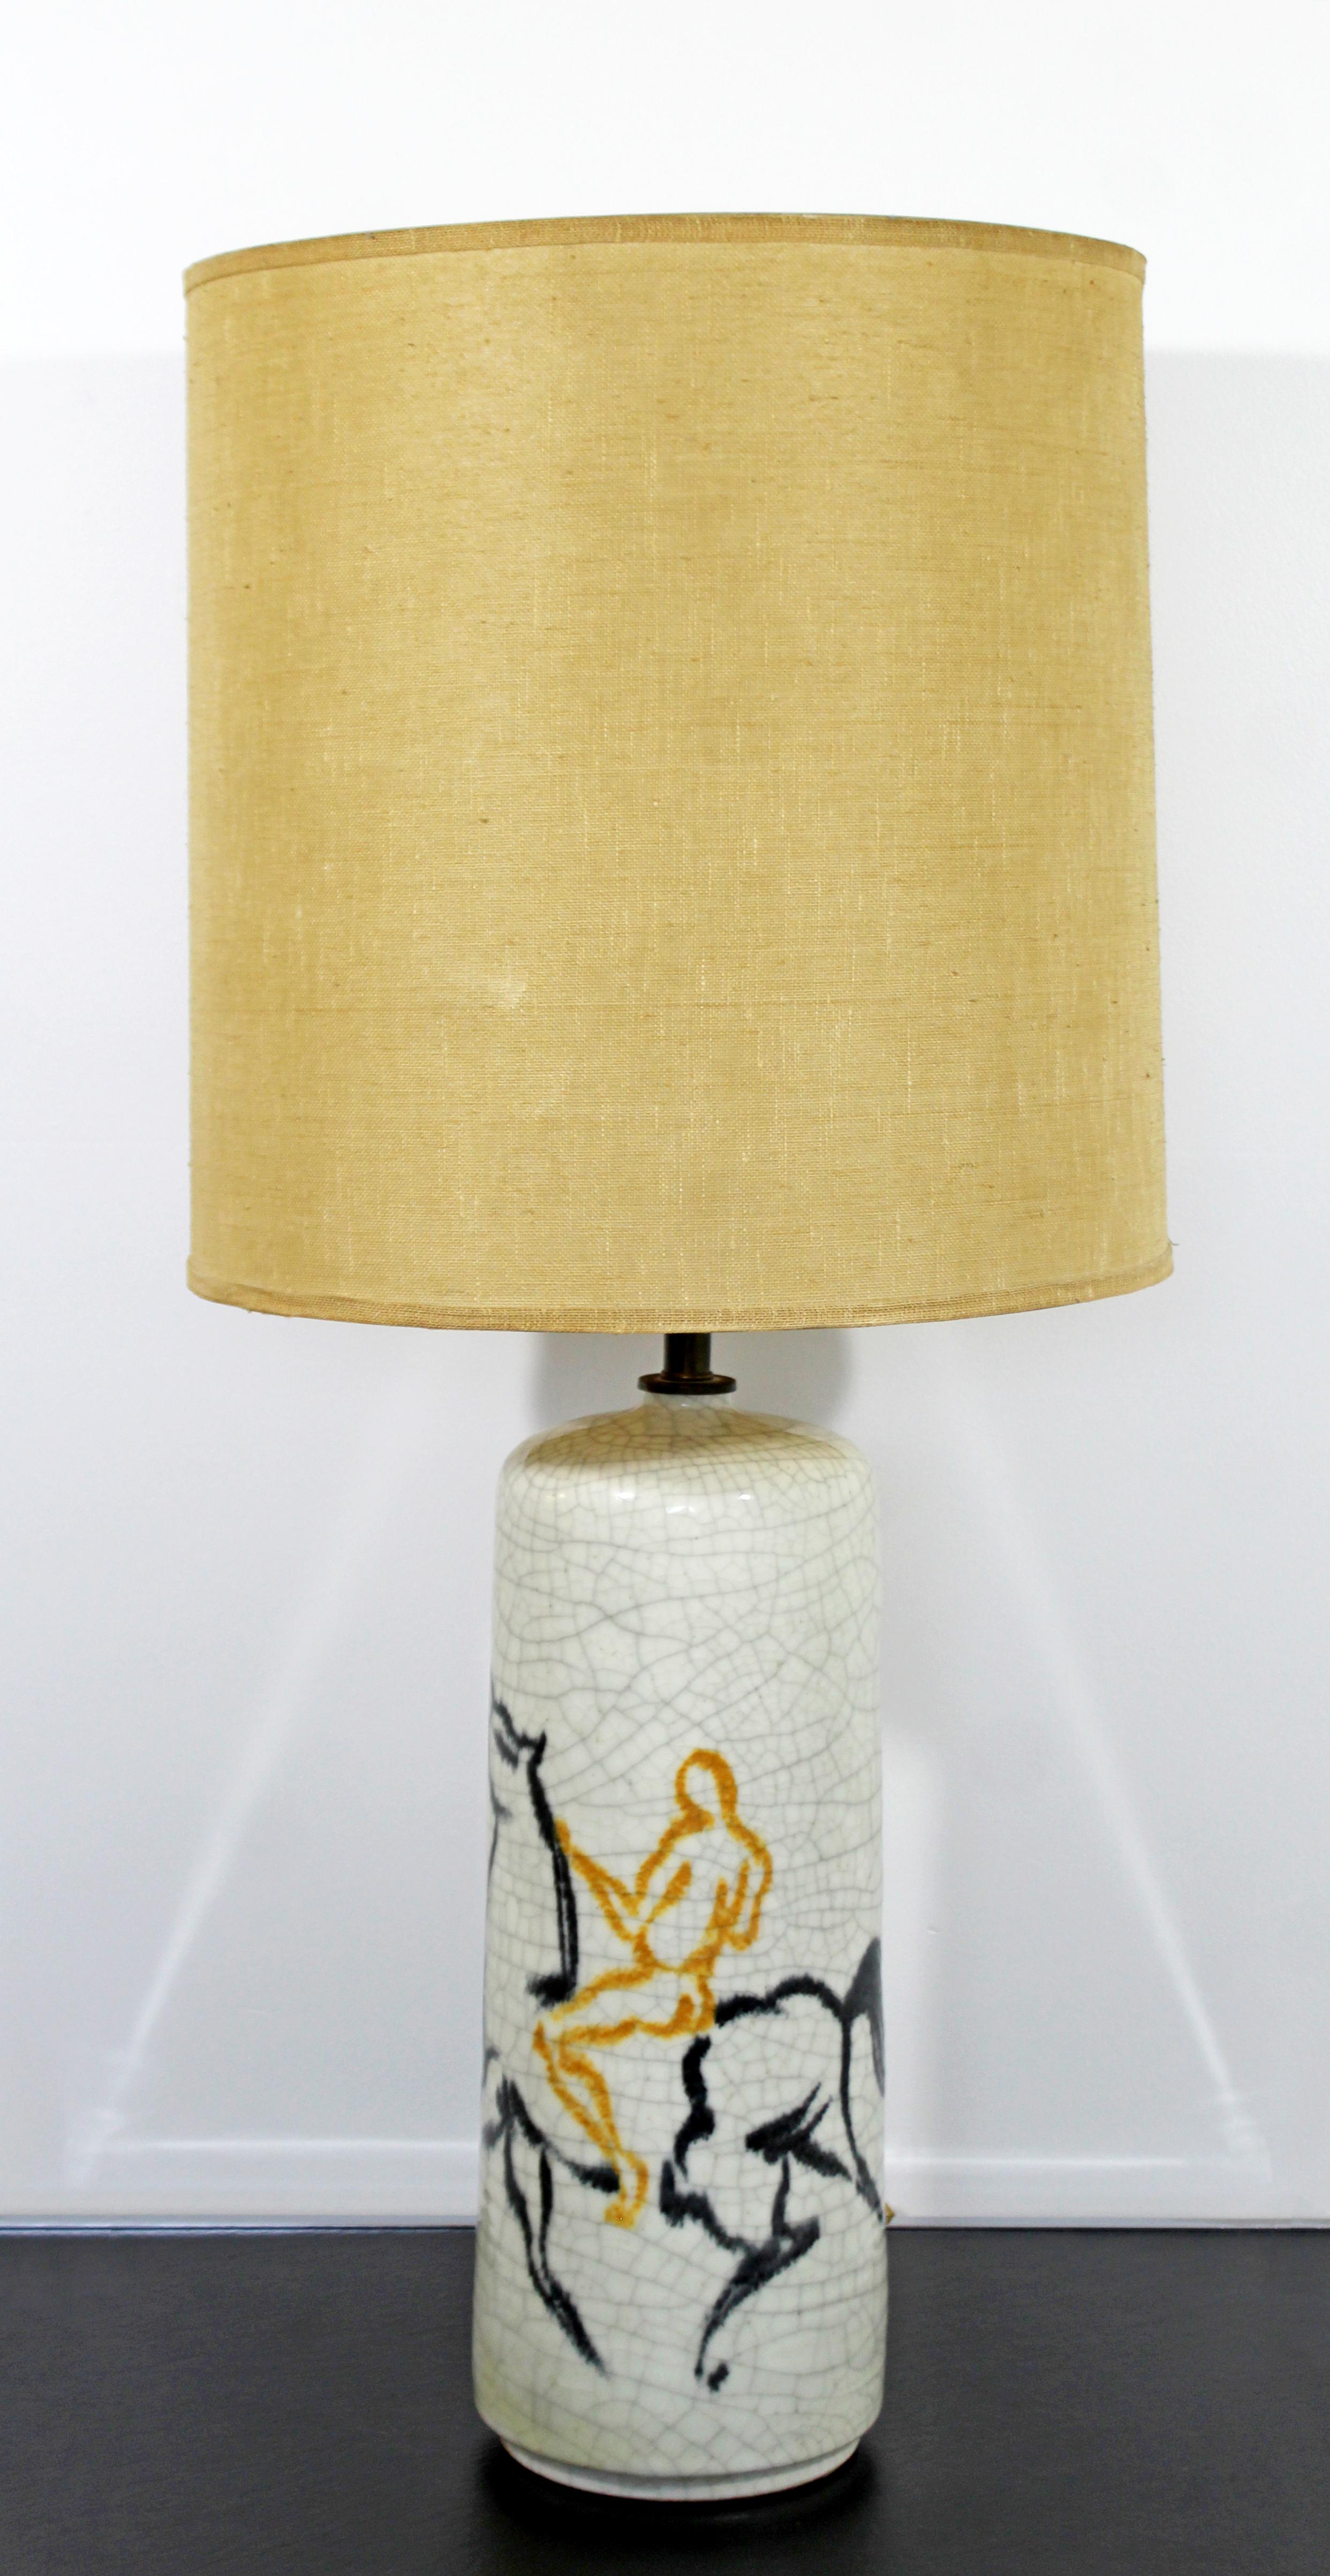 For your consideration is an incredible, white ceramic table lamp, with a horse and rider motif, with original brass finial and shade, by Bitossi, Italian, circa 1970s. In excellent condition. The dimensions of the lamp are 6.5